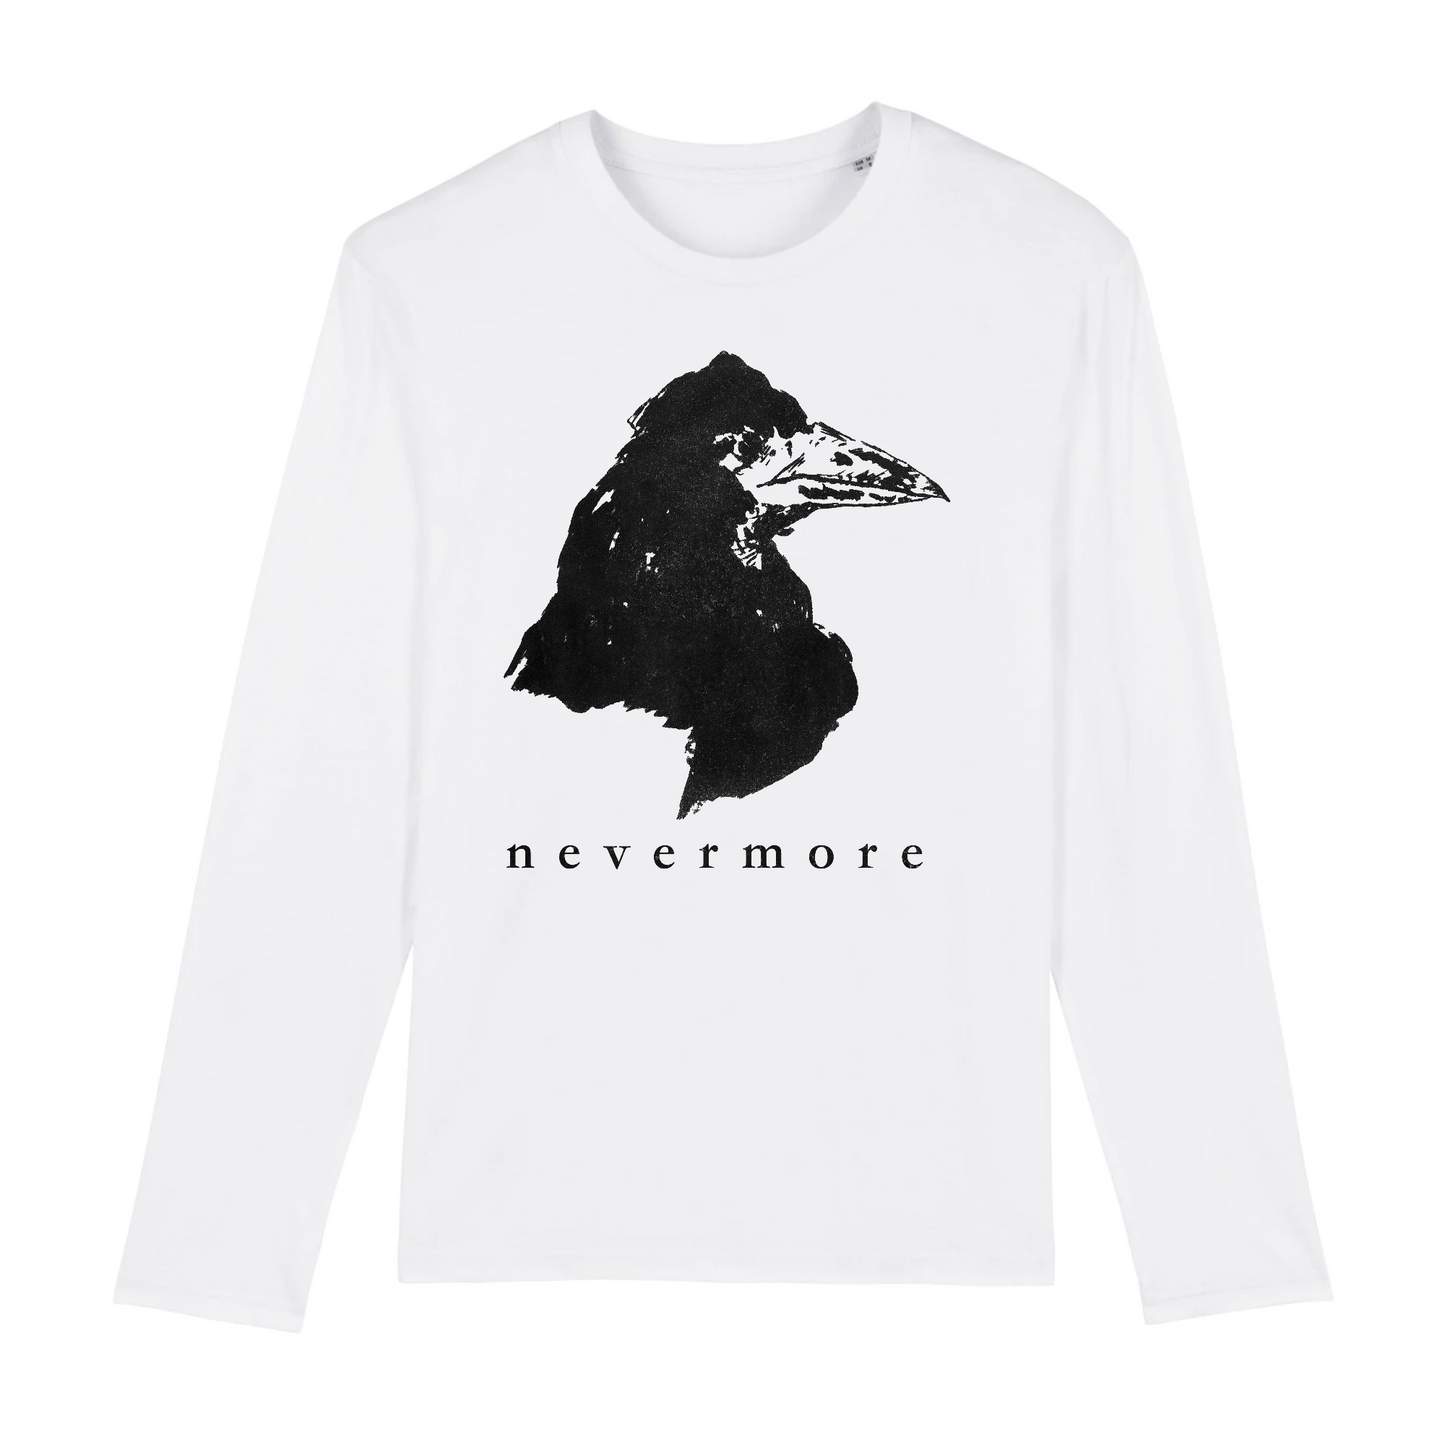 Nevermore by Edouard Manet - Organic Cotton Long-Sleeve T-Shirt